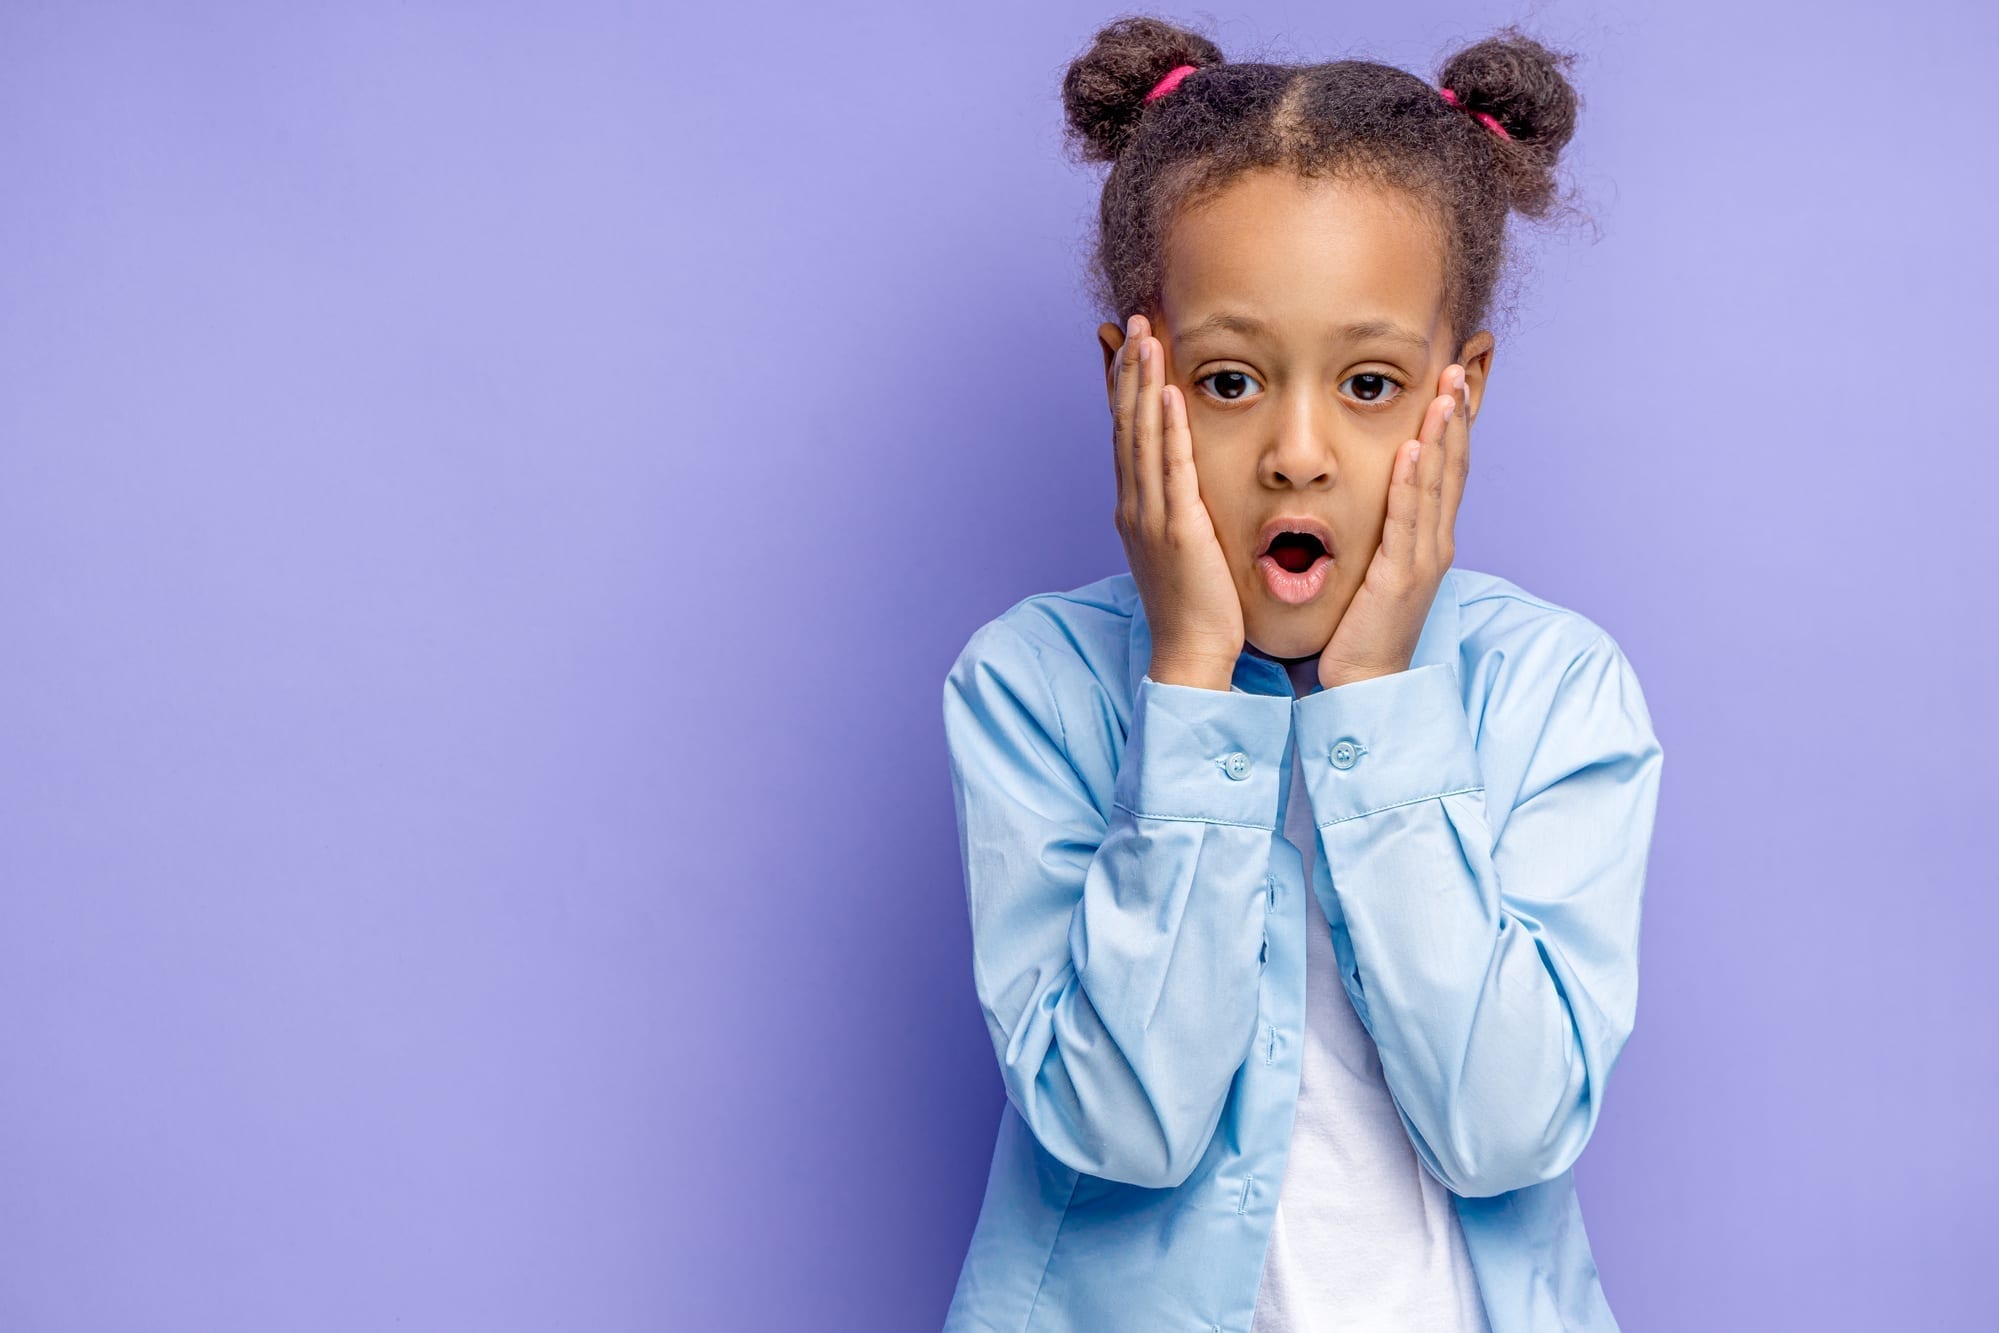 little girl with surprised or fearful face on purple background